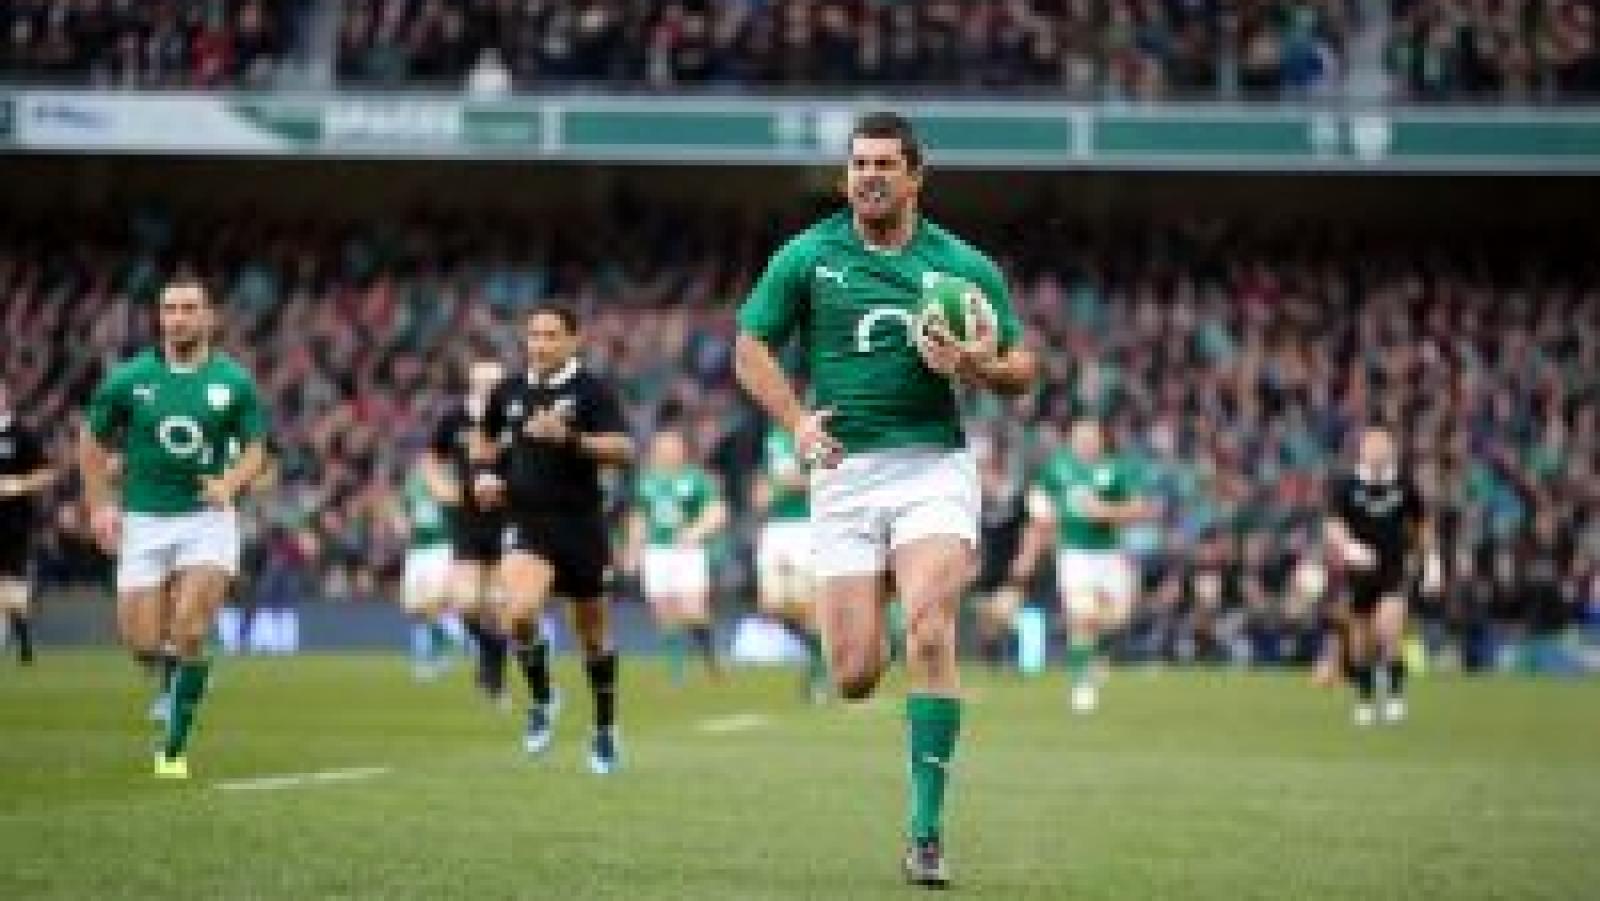 Rob Kearney on a rugby pitch